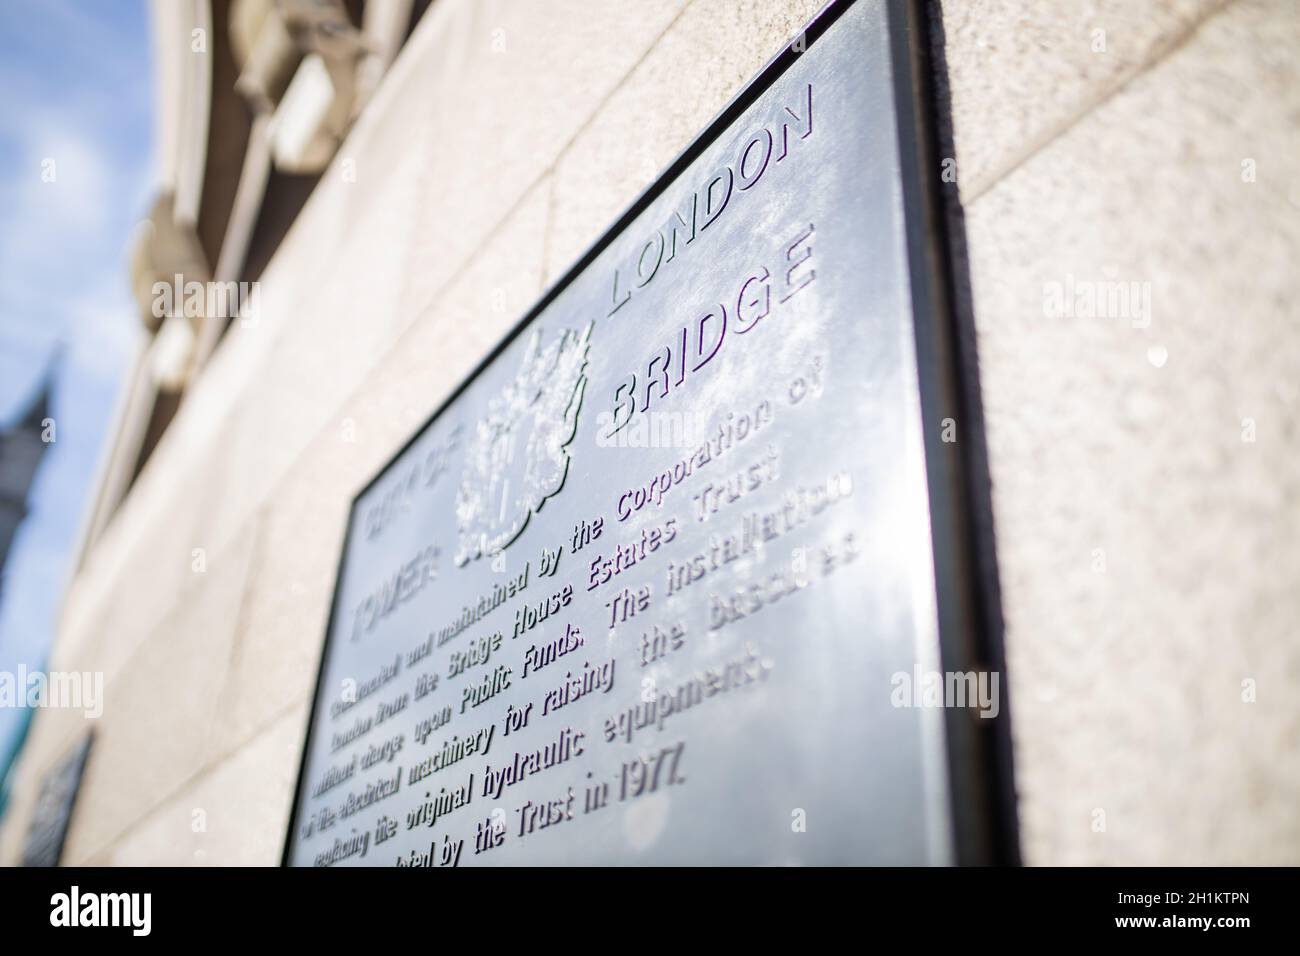 London, UK - September 30, 2020: Landscape view of the Tower Bridge commemorative plaque on a concrete wall, with the London coat of arms and the brid Stock Photo